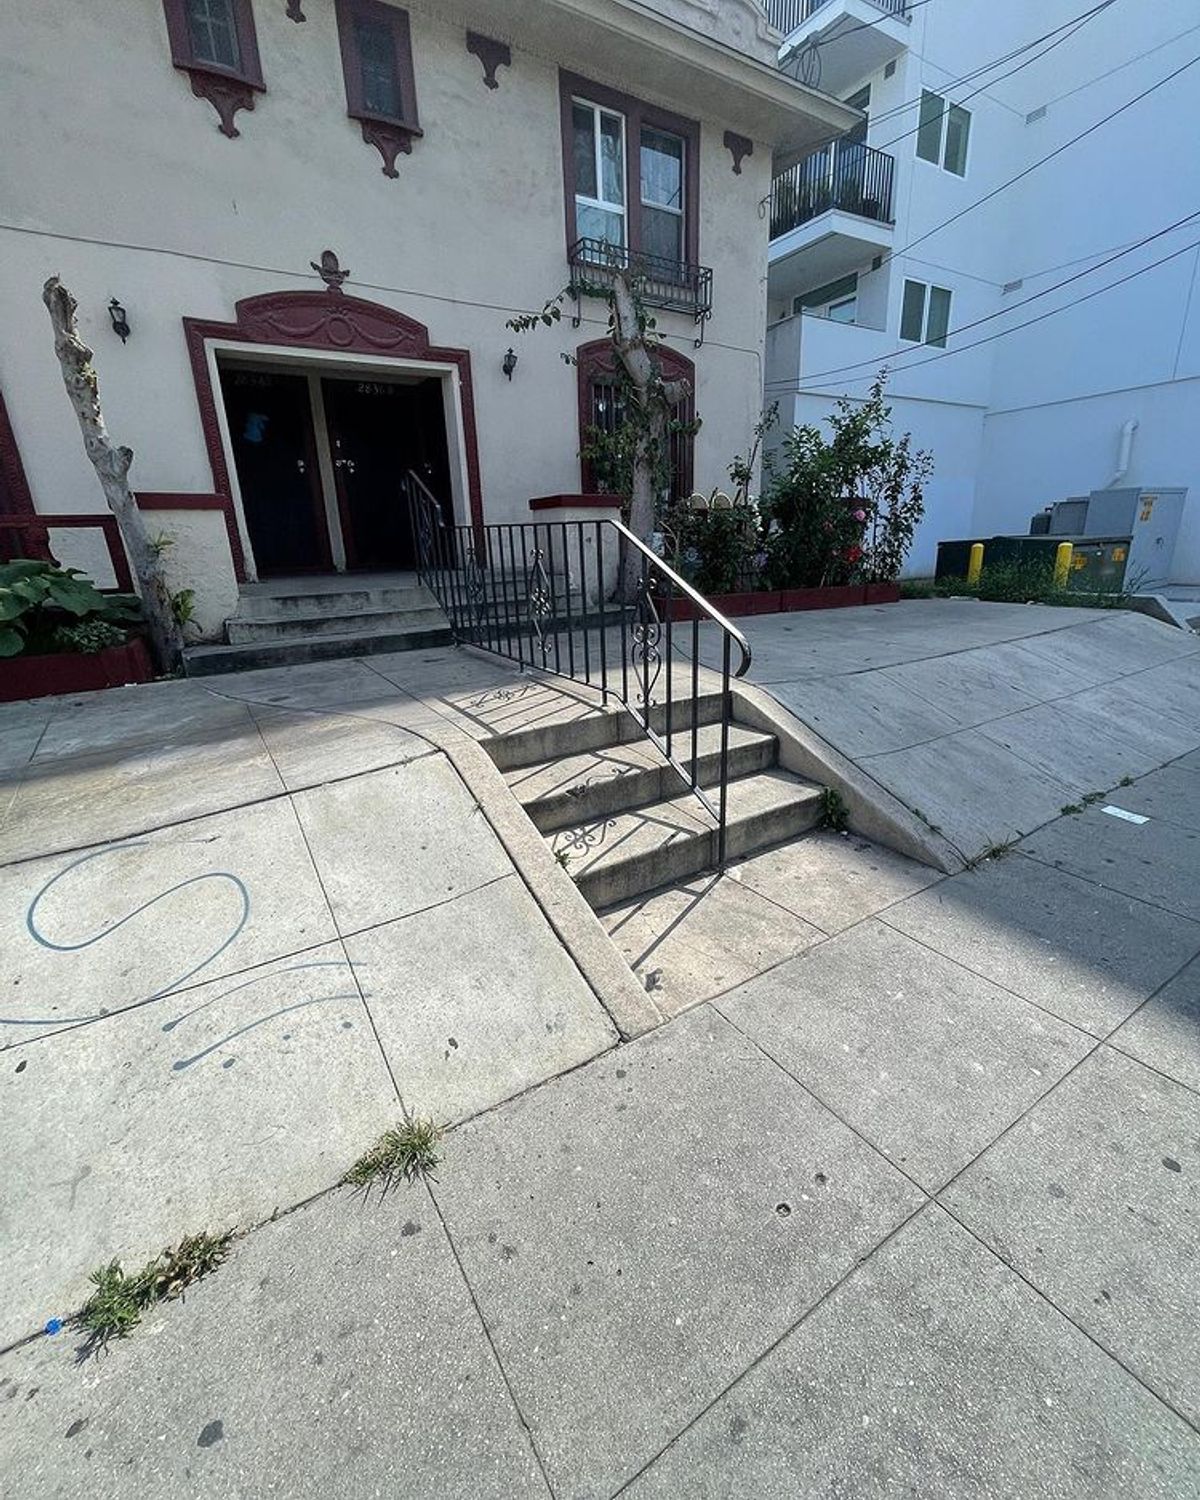 Image for skate spot W 9th St - Bank Over Rail